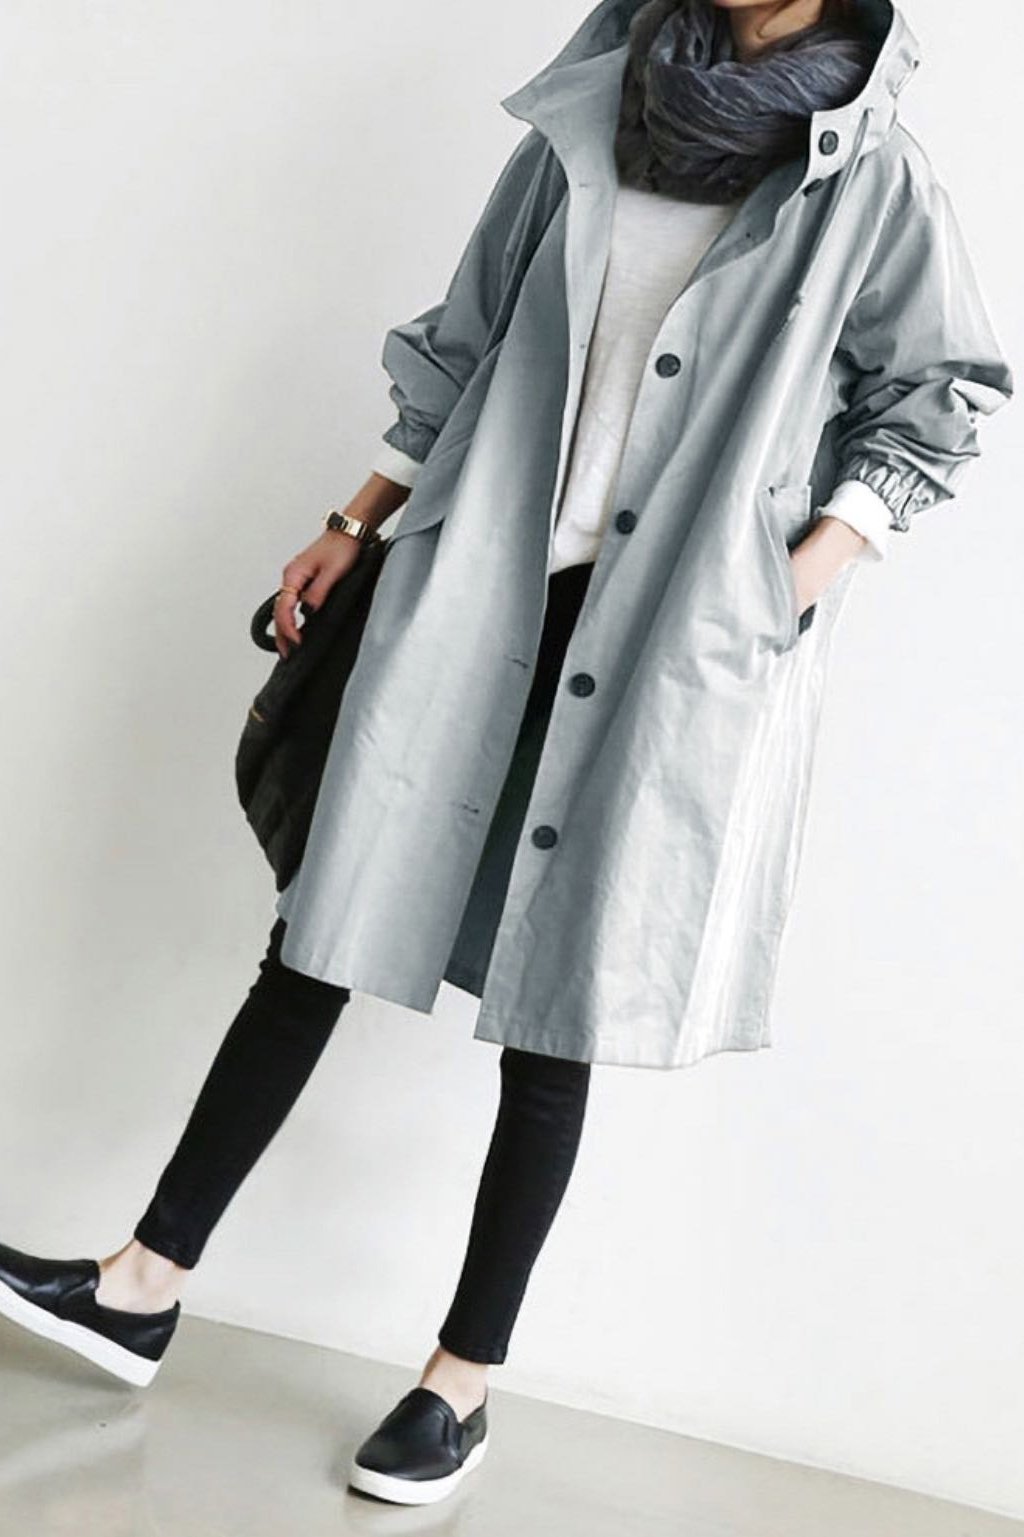 🔥 Last Day 70%OFF🔥 Hooded Trench Coat